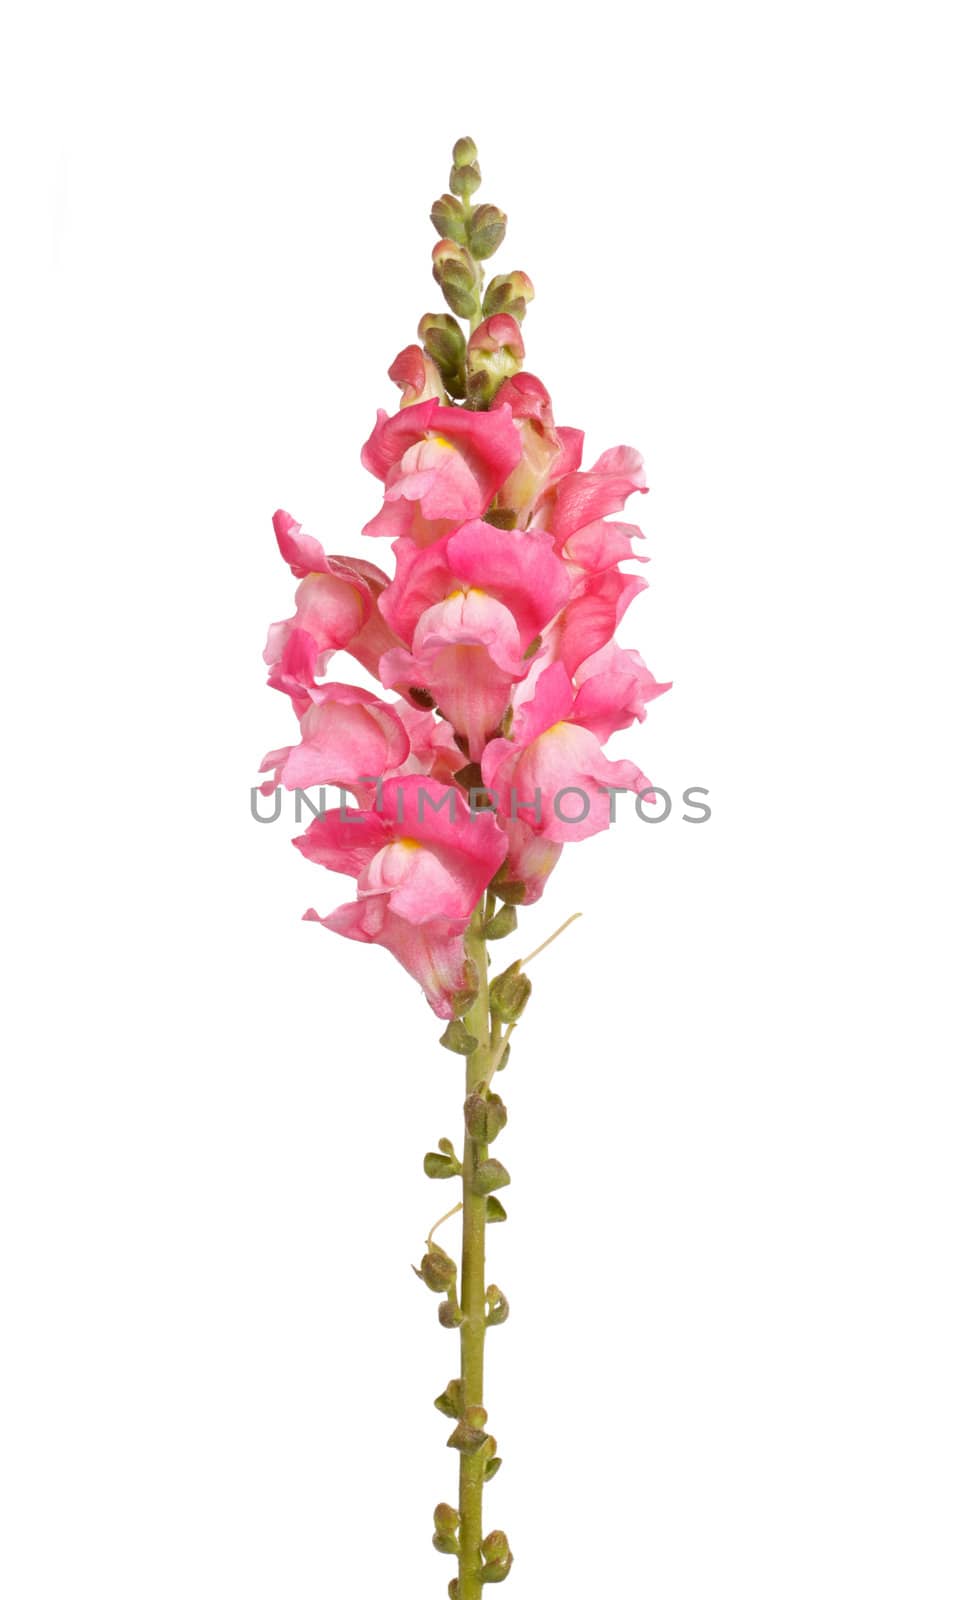 Single stem of pink shapdragon flowers isolated on white by sgoodwin4813